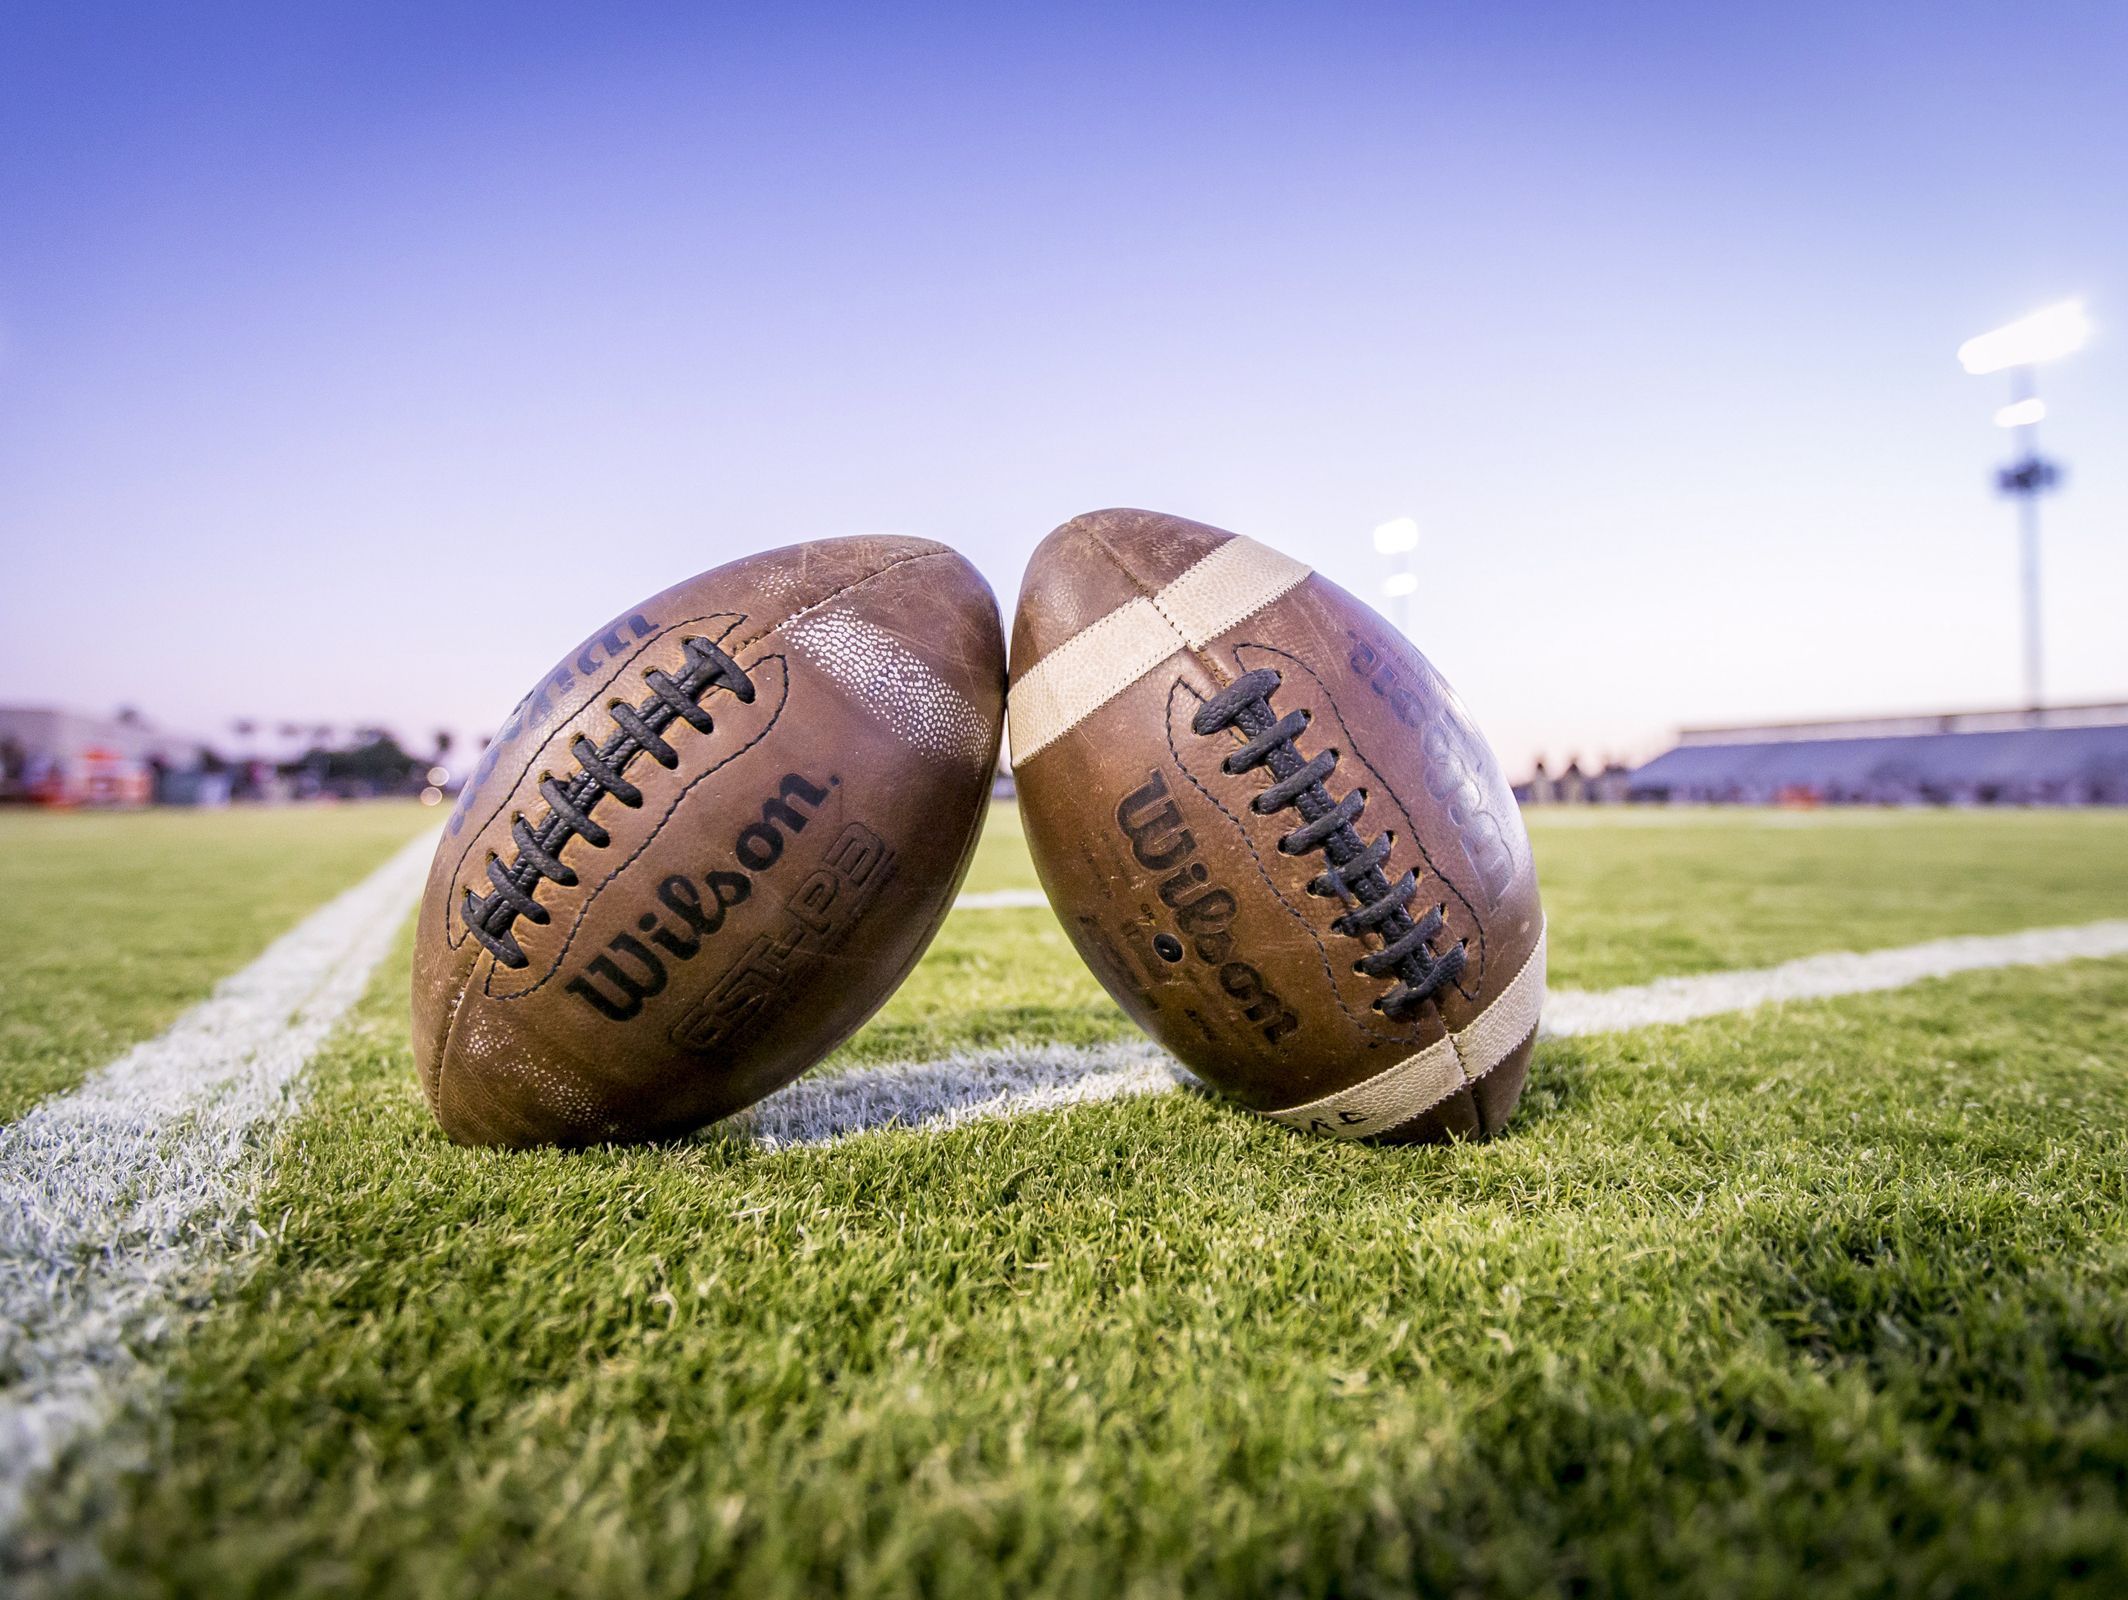 Footballs sit on an open field prior to the high school football game between Perry and Hamilton at Hamilton high school on Oct. 21, 2016 in Chandler, Ariz.